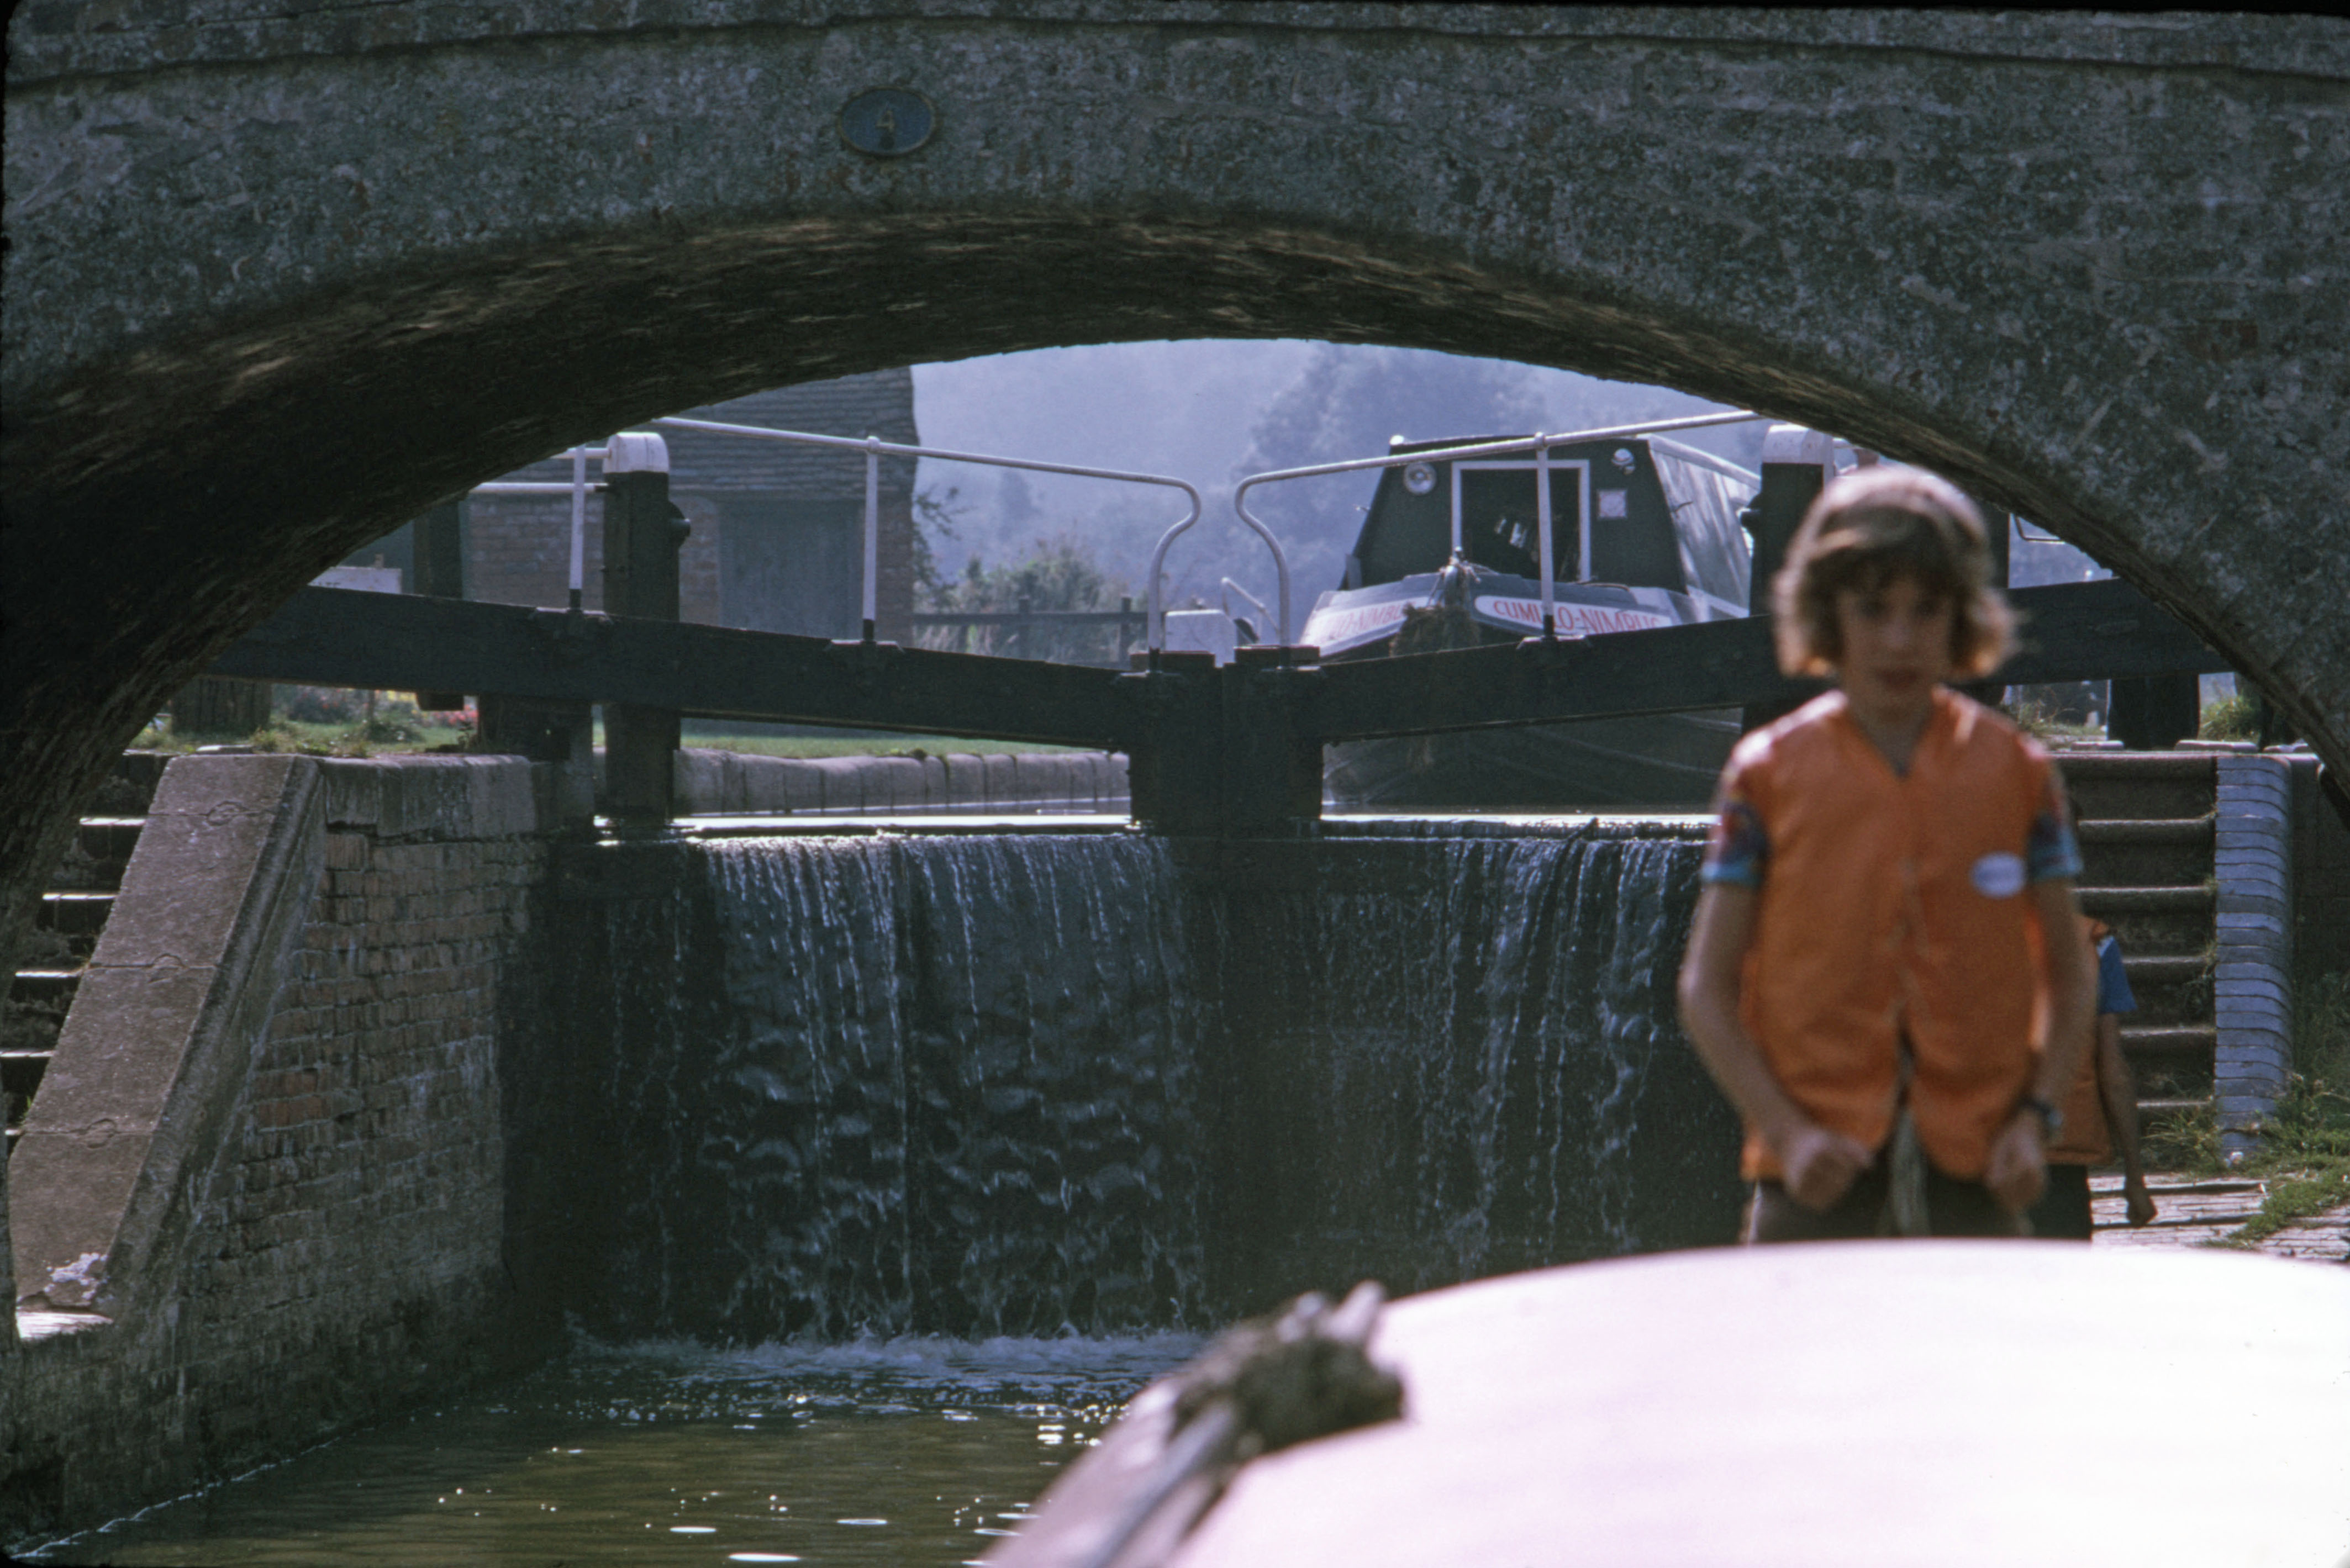 7505602 August 1975 - Waiting for the boat in the lock to come through.